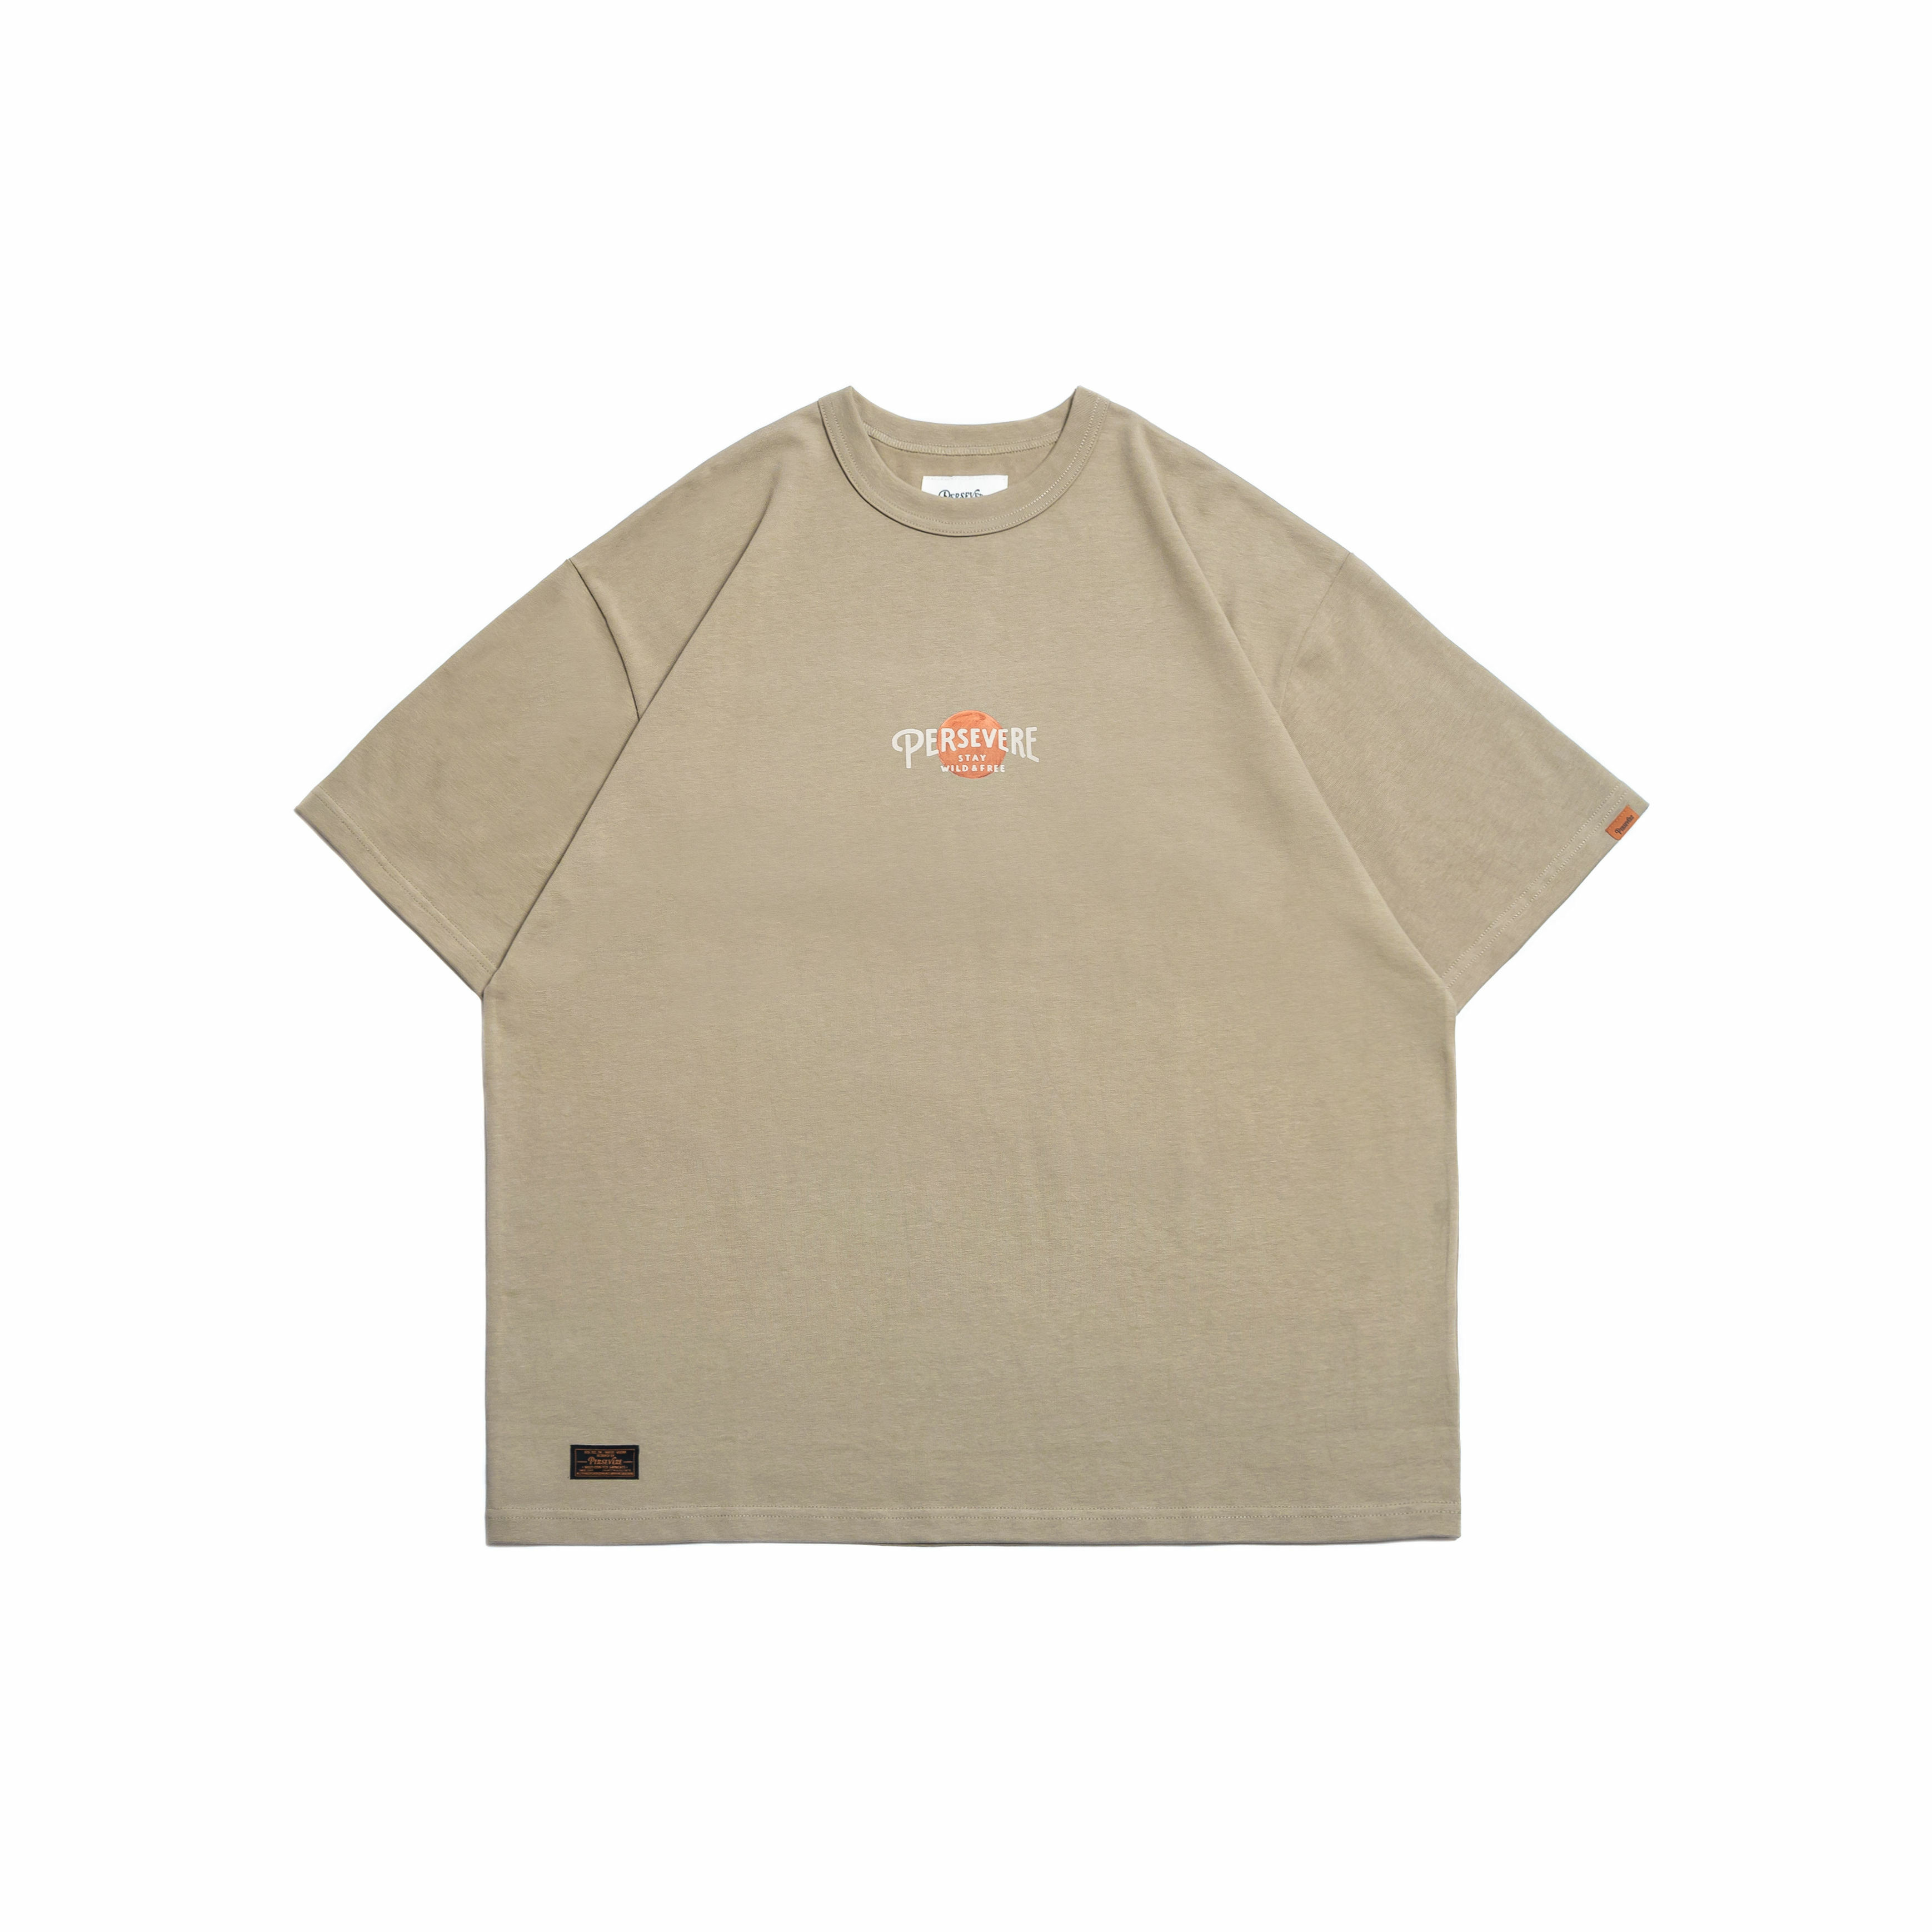 PERSEVERE SUN GRAPHIC T-SHIRT - SAND COLOR